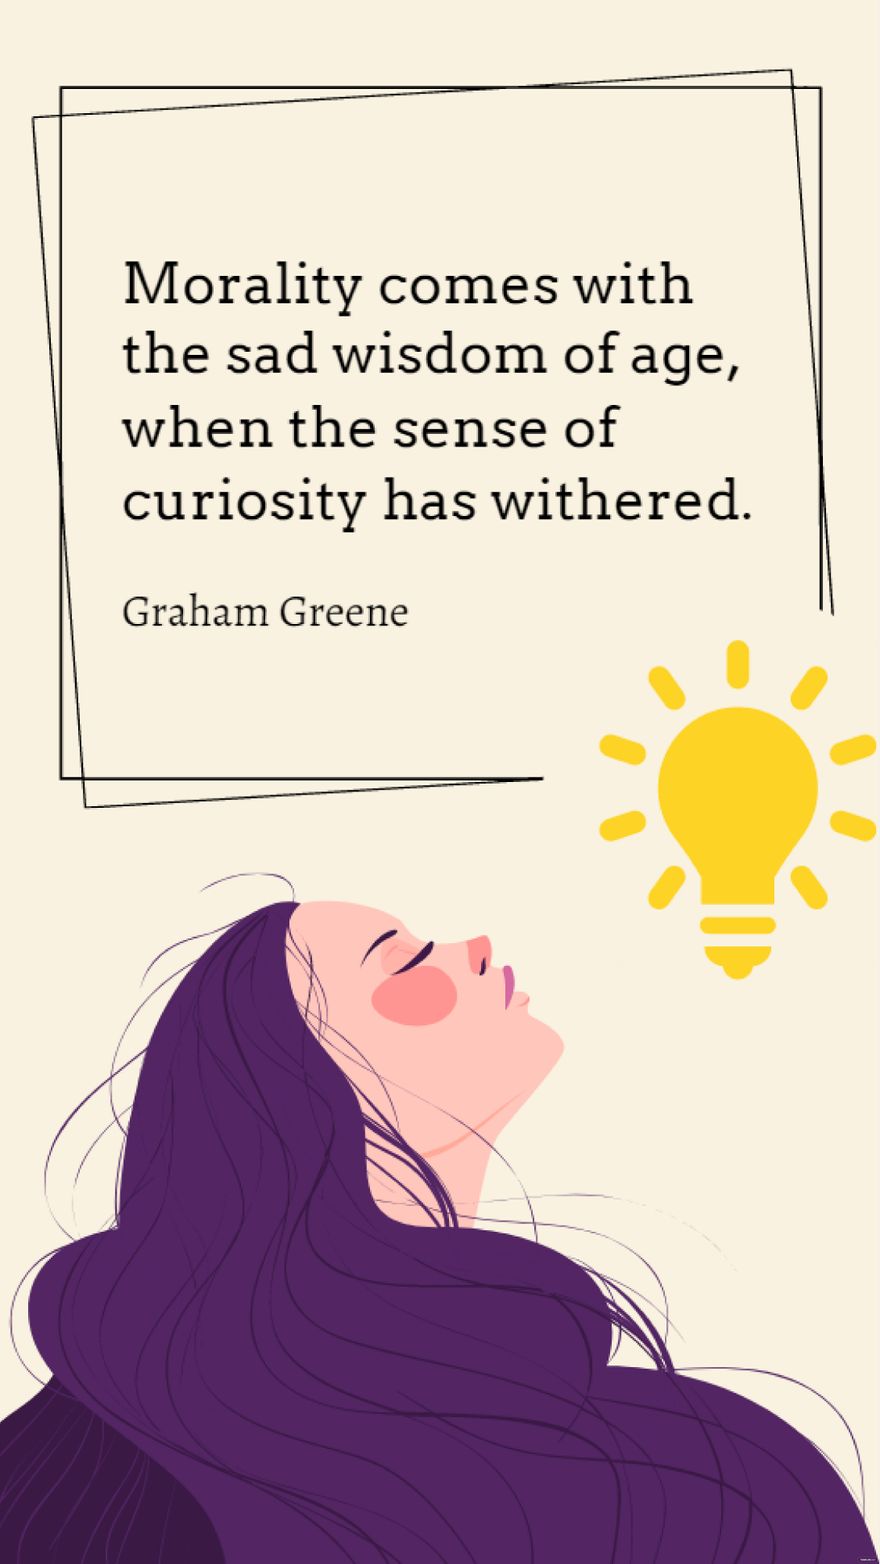 Graham Greene - Morality comes with the sad wisdom of age, when the sense of curiosity has withered.